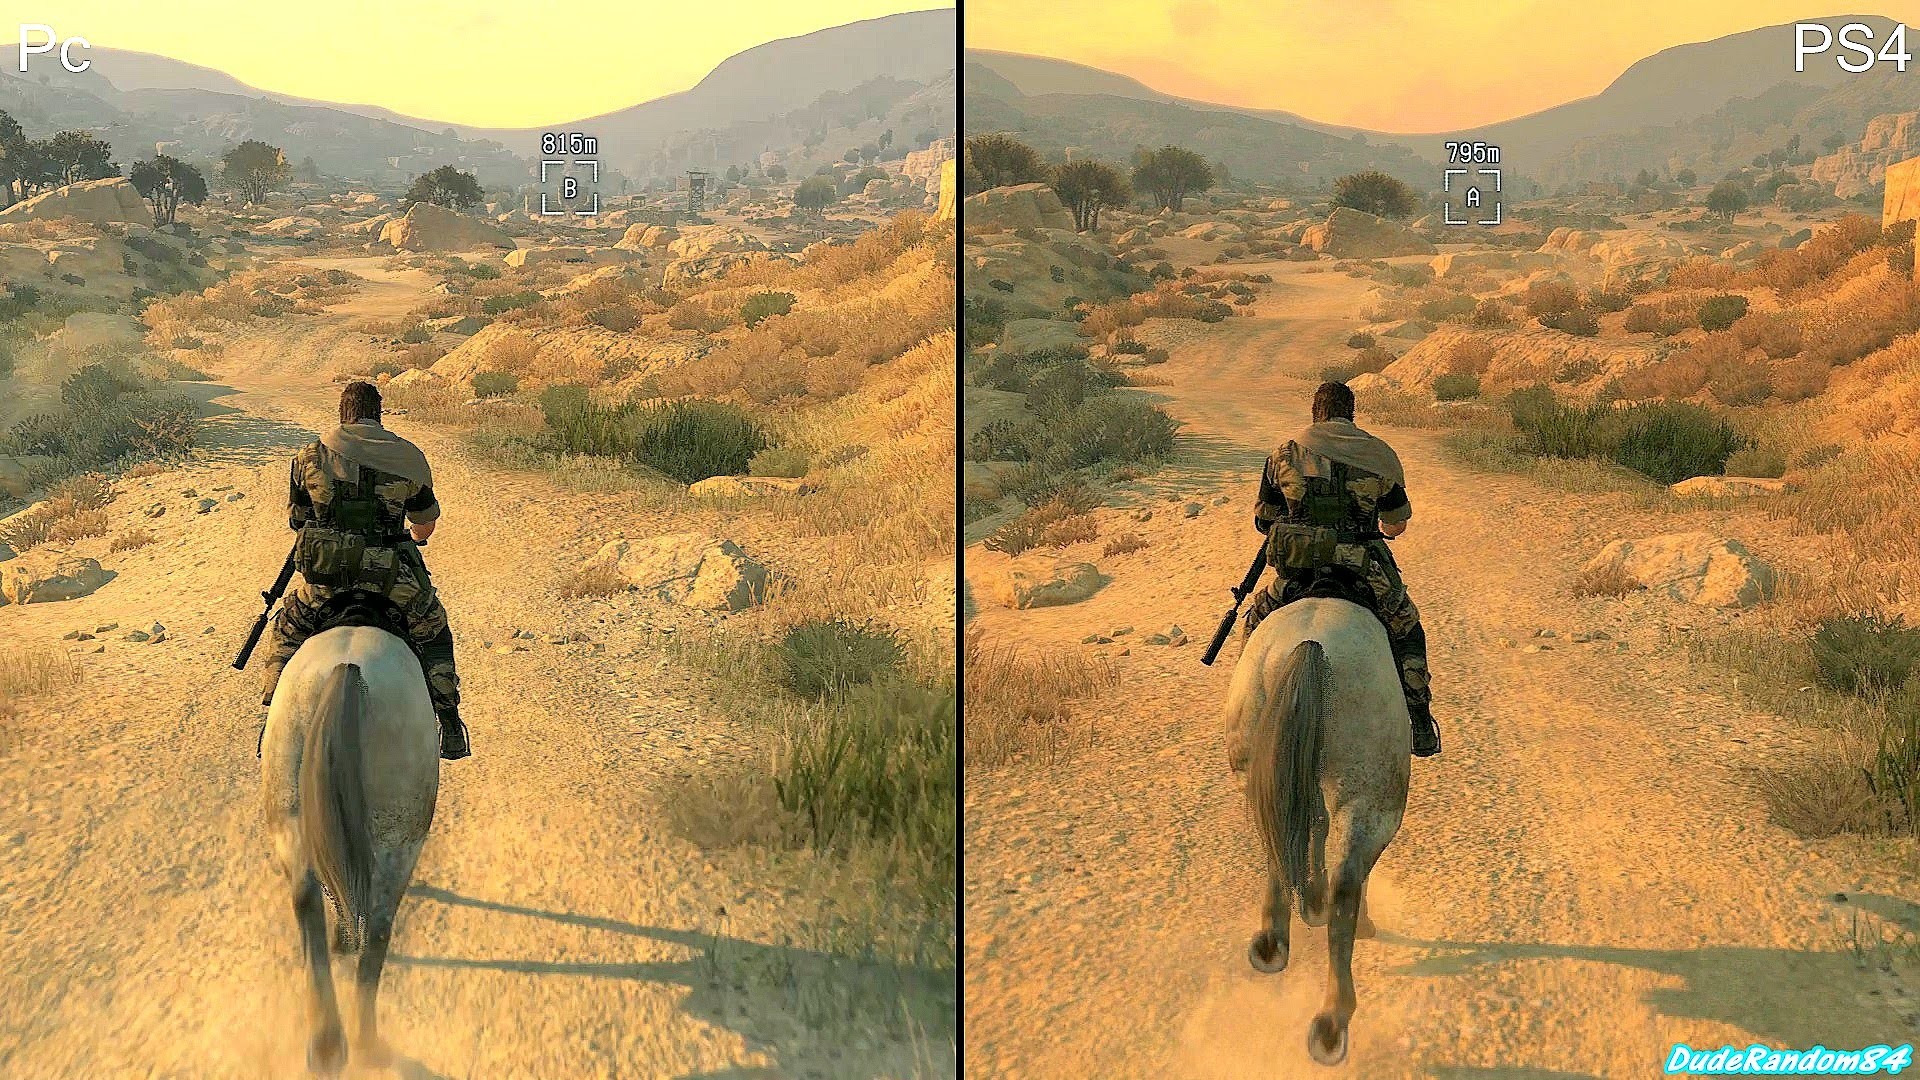 1920x1080 Metal Gear Solid 5 The Phantom Pain PS4 Vs Pc Graphics Comparison - YouTube